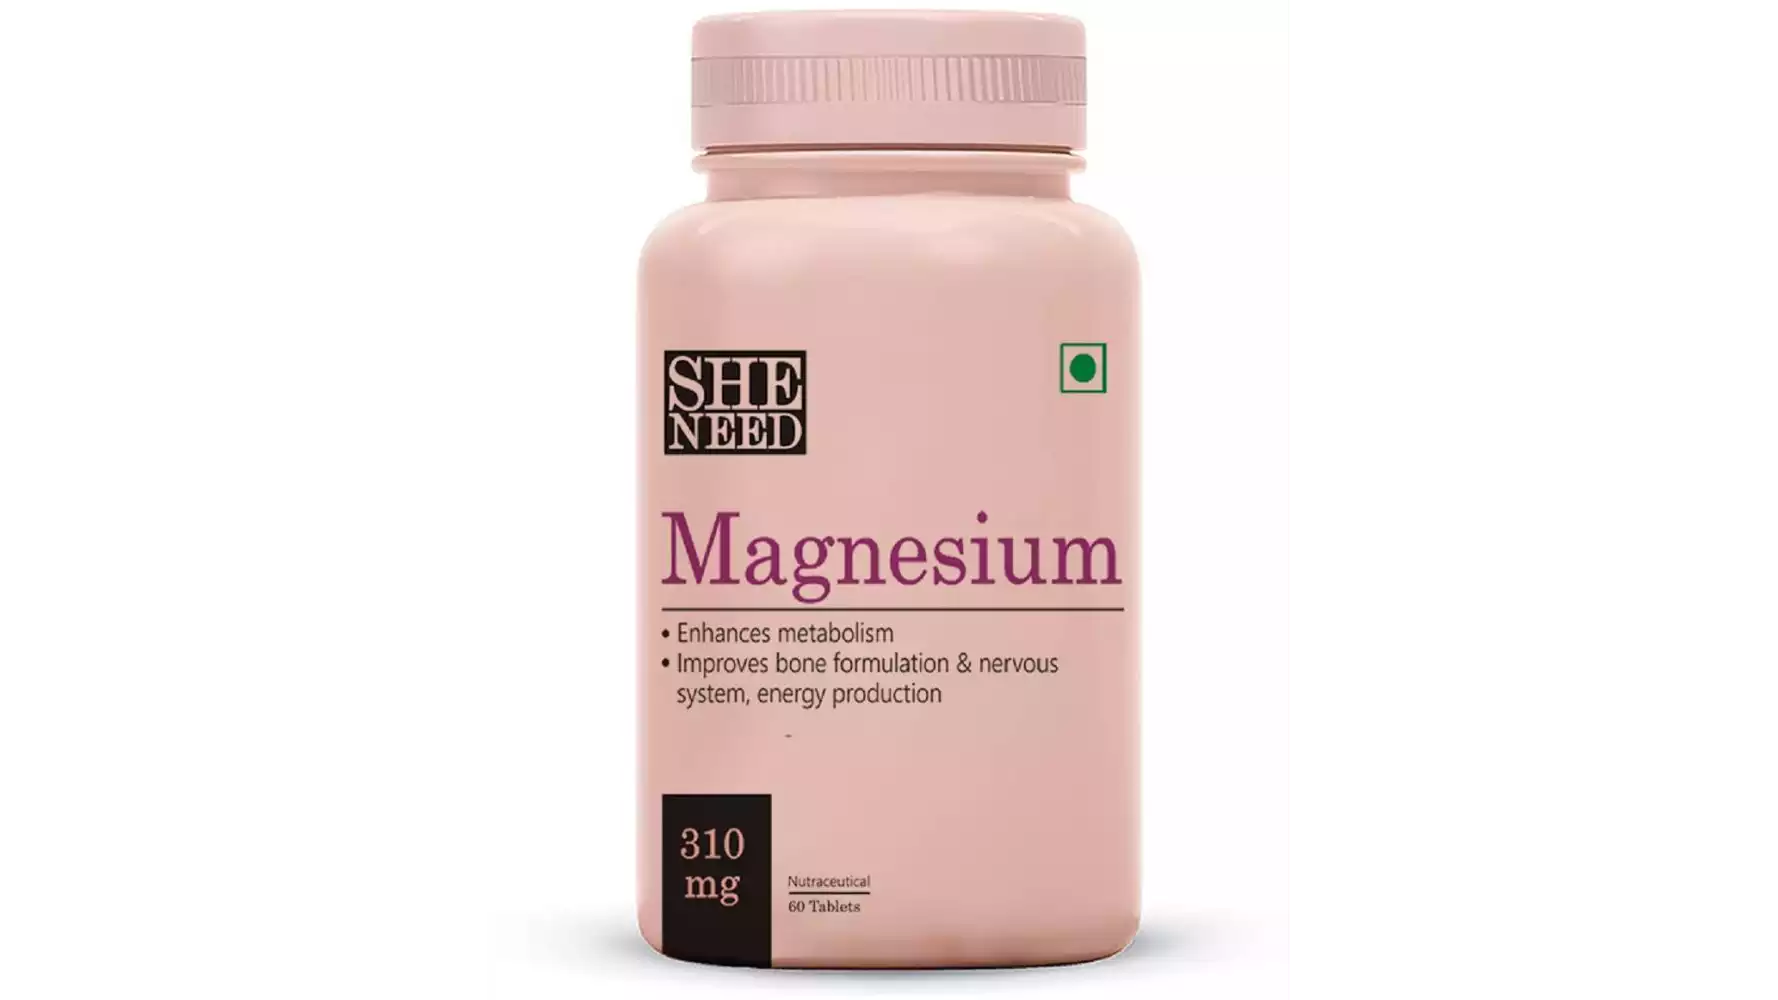 SheNeed Magnesium Supplements For Men And Women (310Mg) Capsules (60caps)